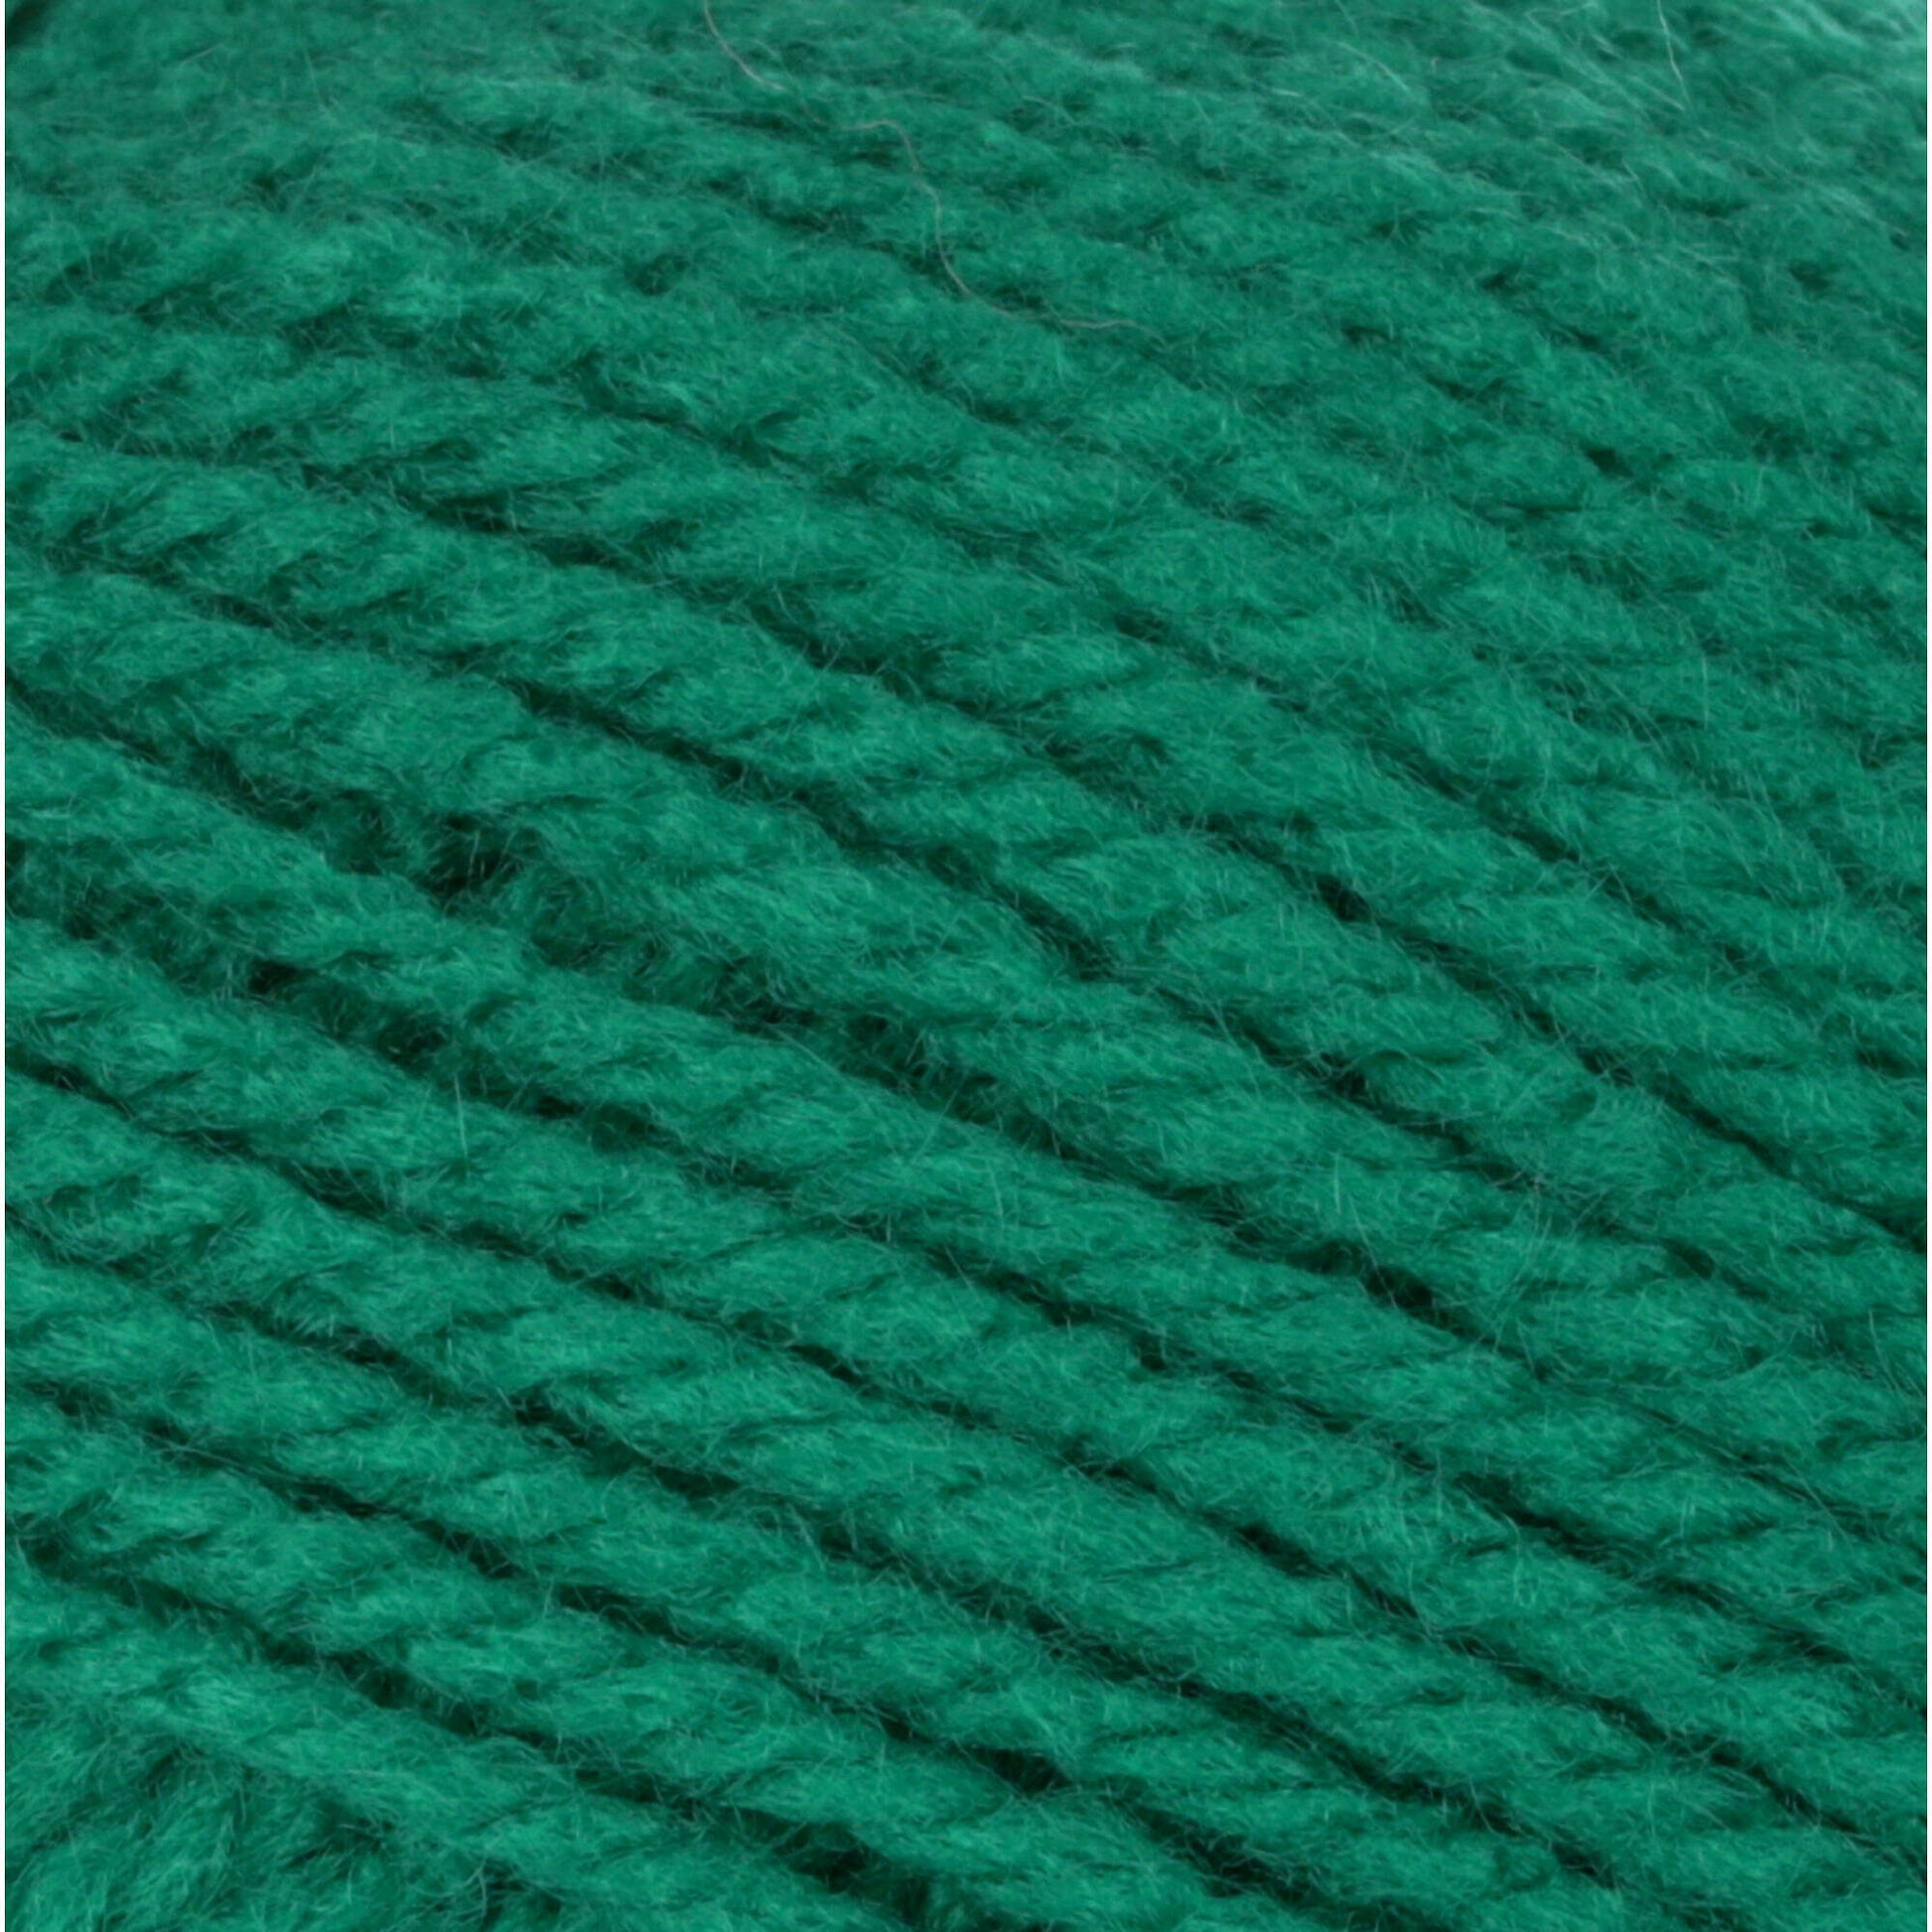 Patons® Astra - Emerald (detail)